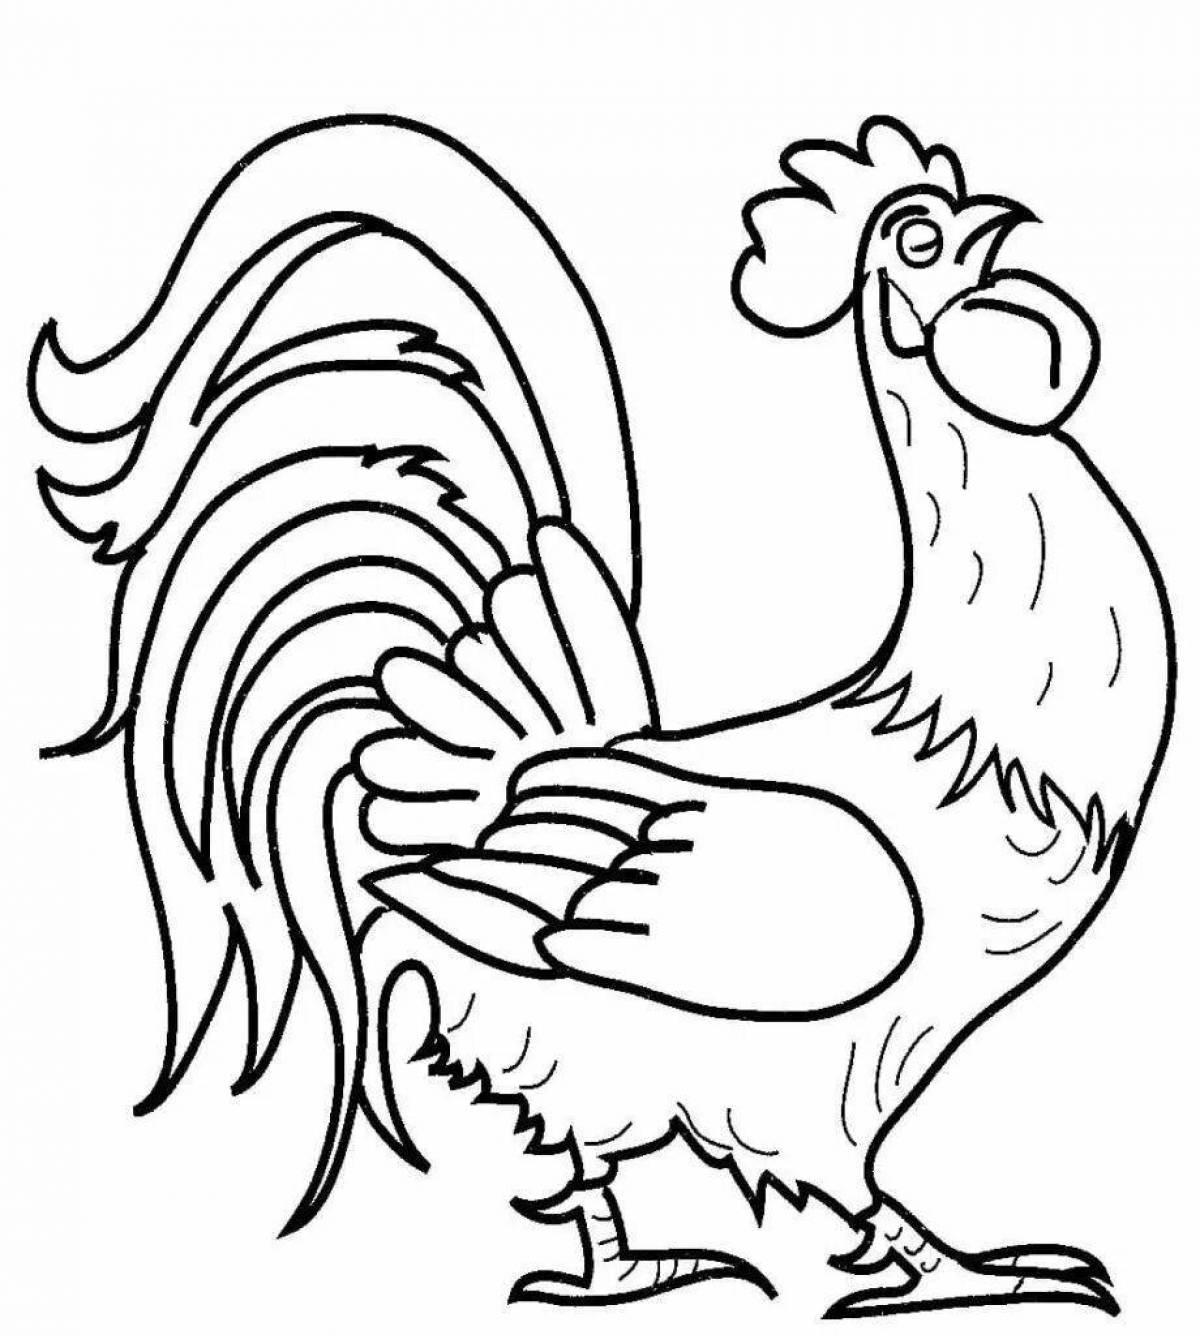 Amazing rooster coloring book for preschoolers 3-4 years old